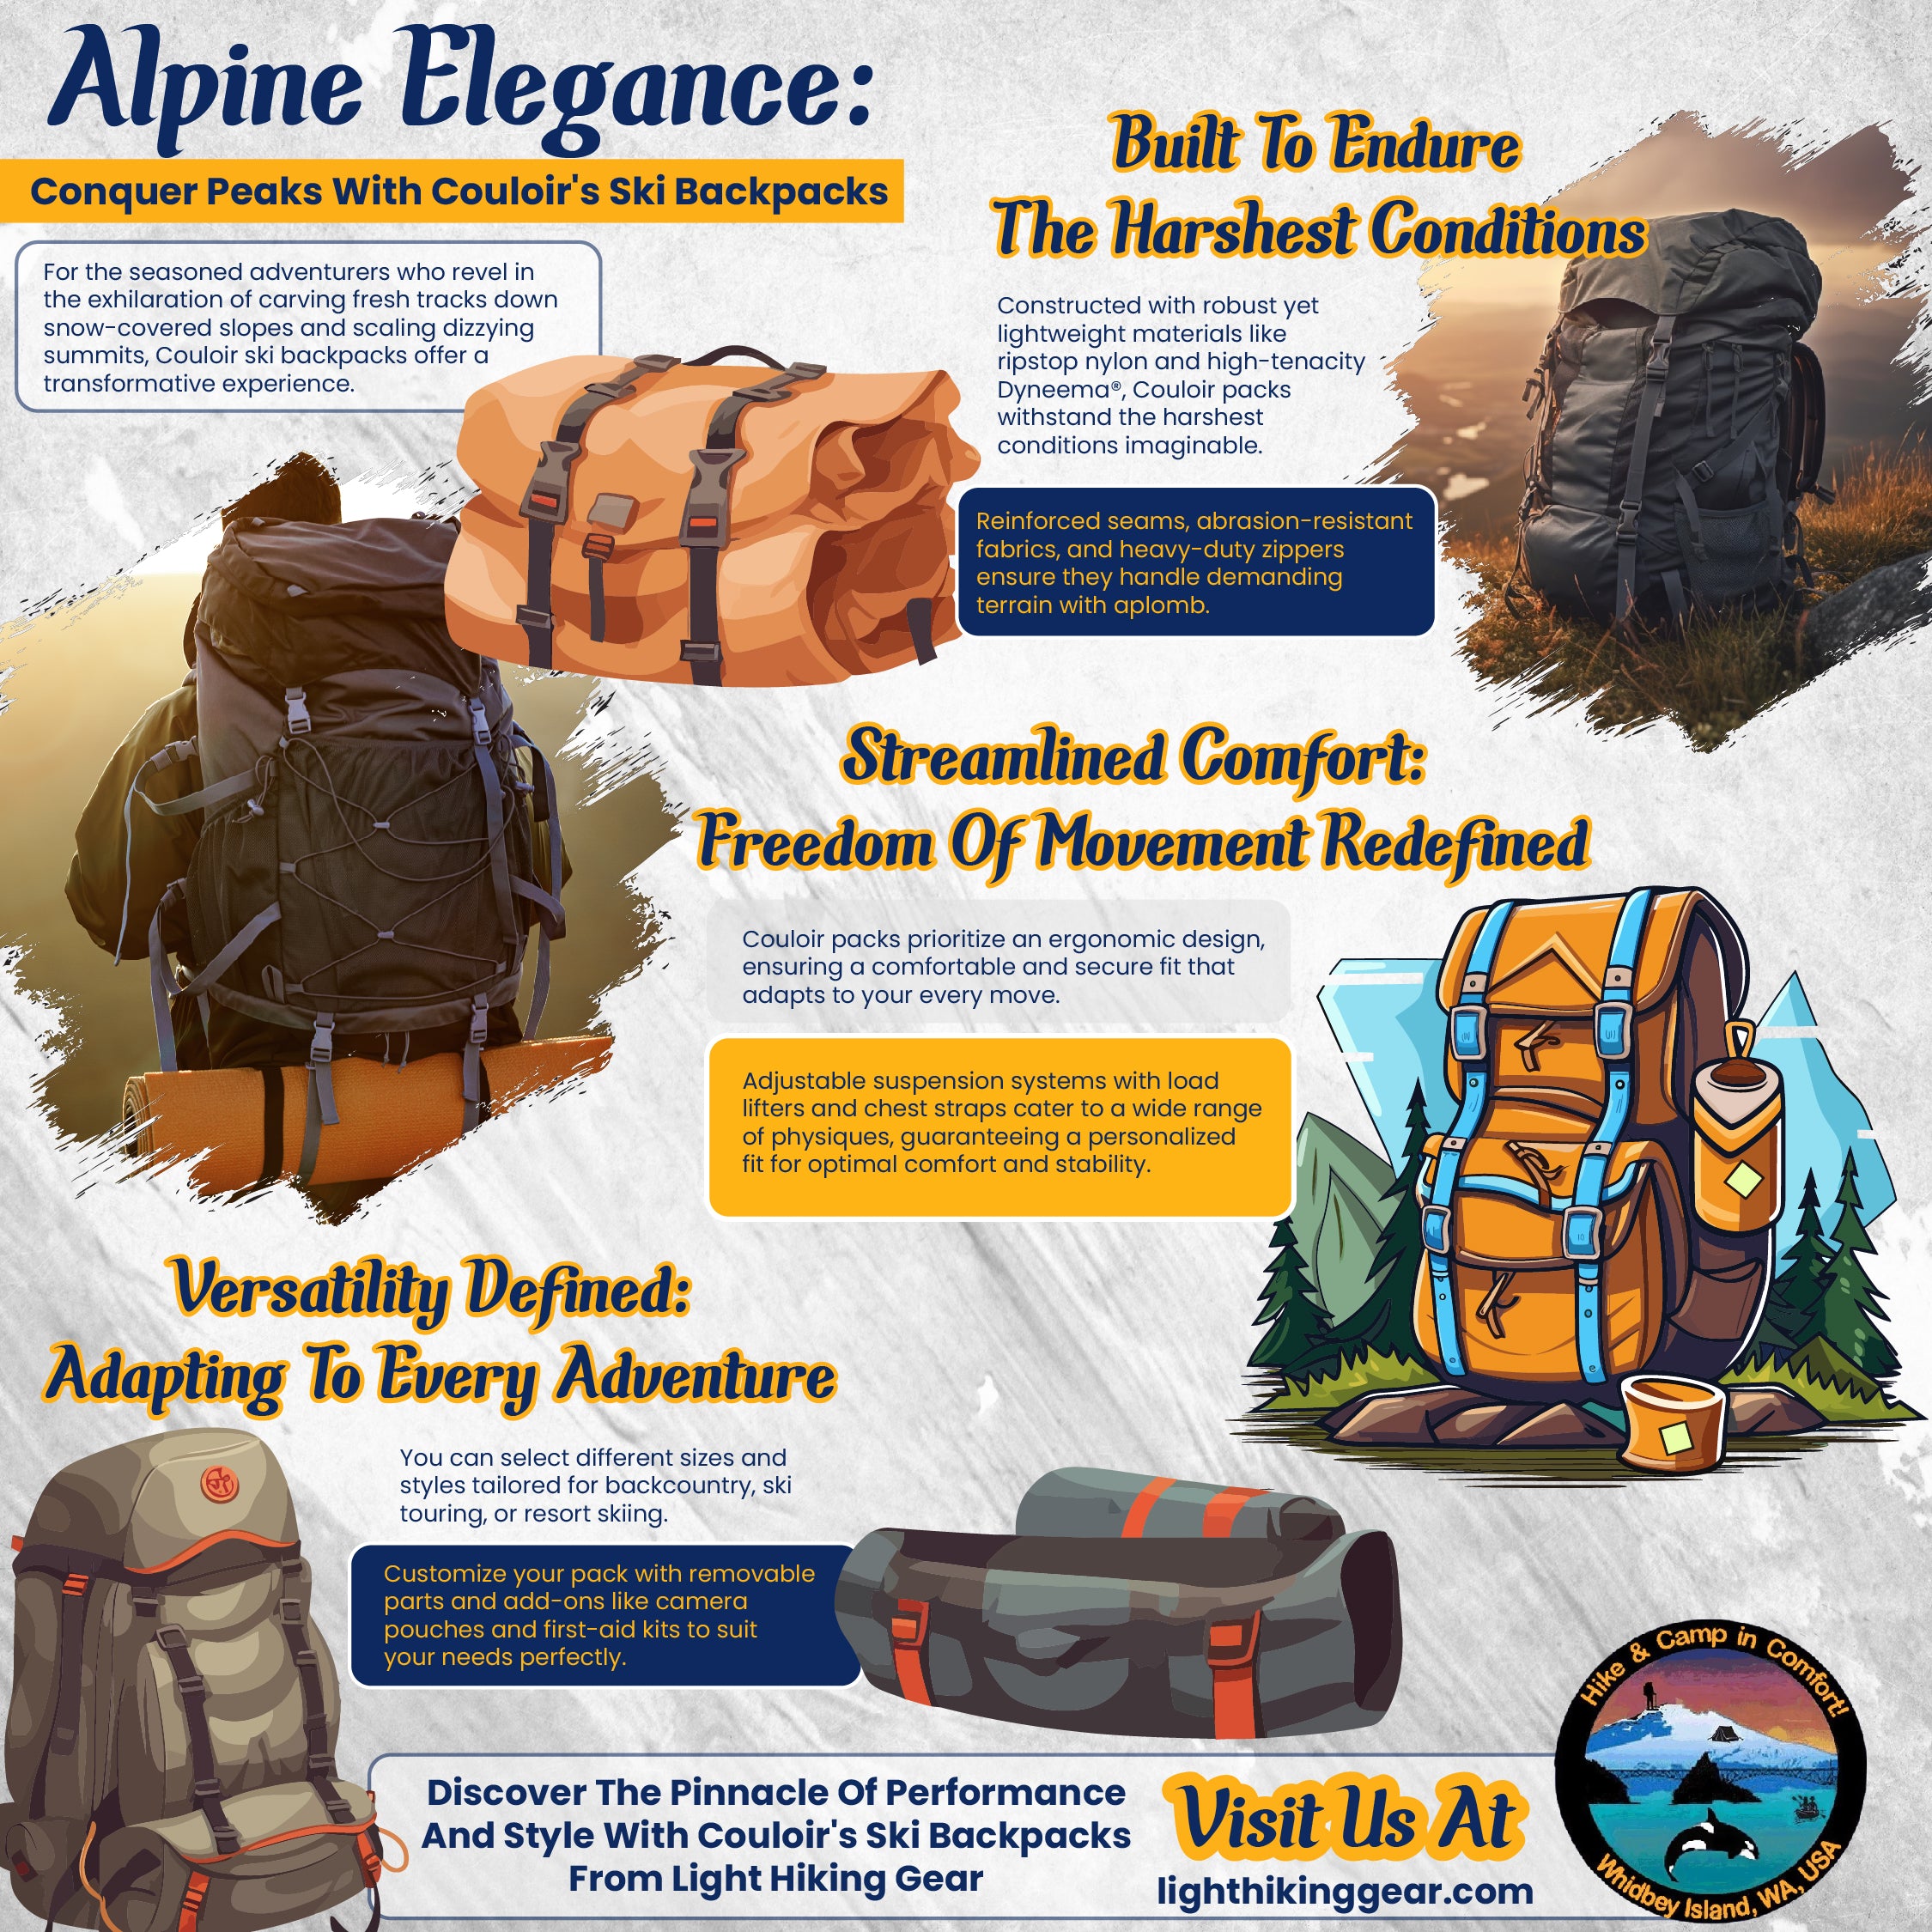 Alpine Elegance: Conquer Peaks with Couloir's Ski Backpacks